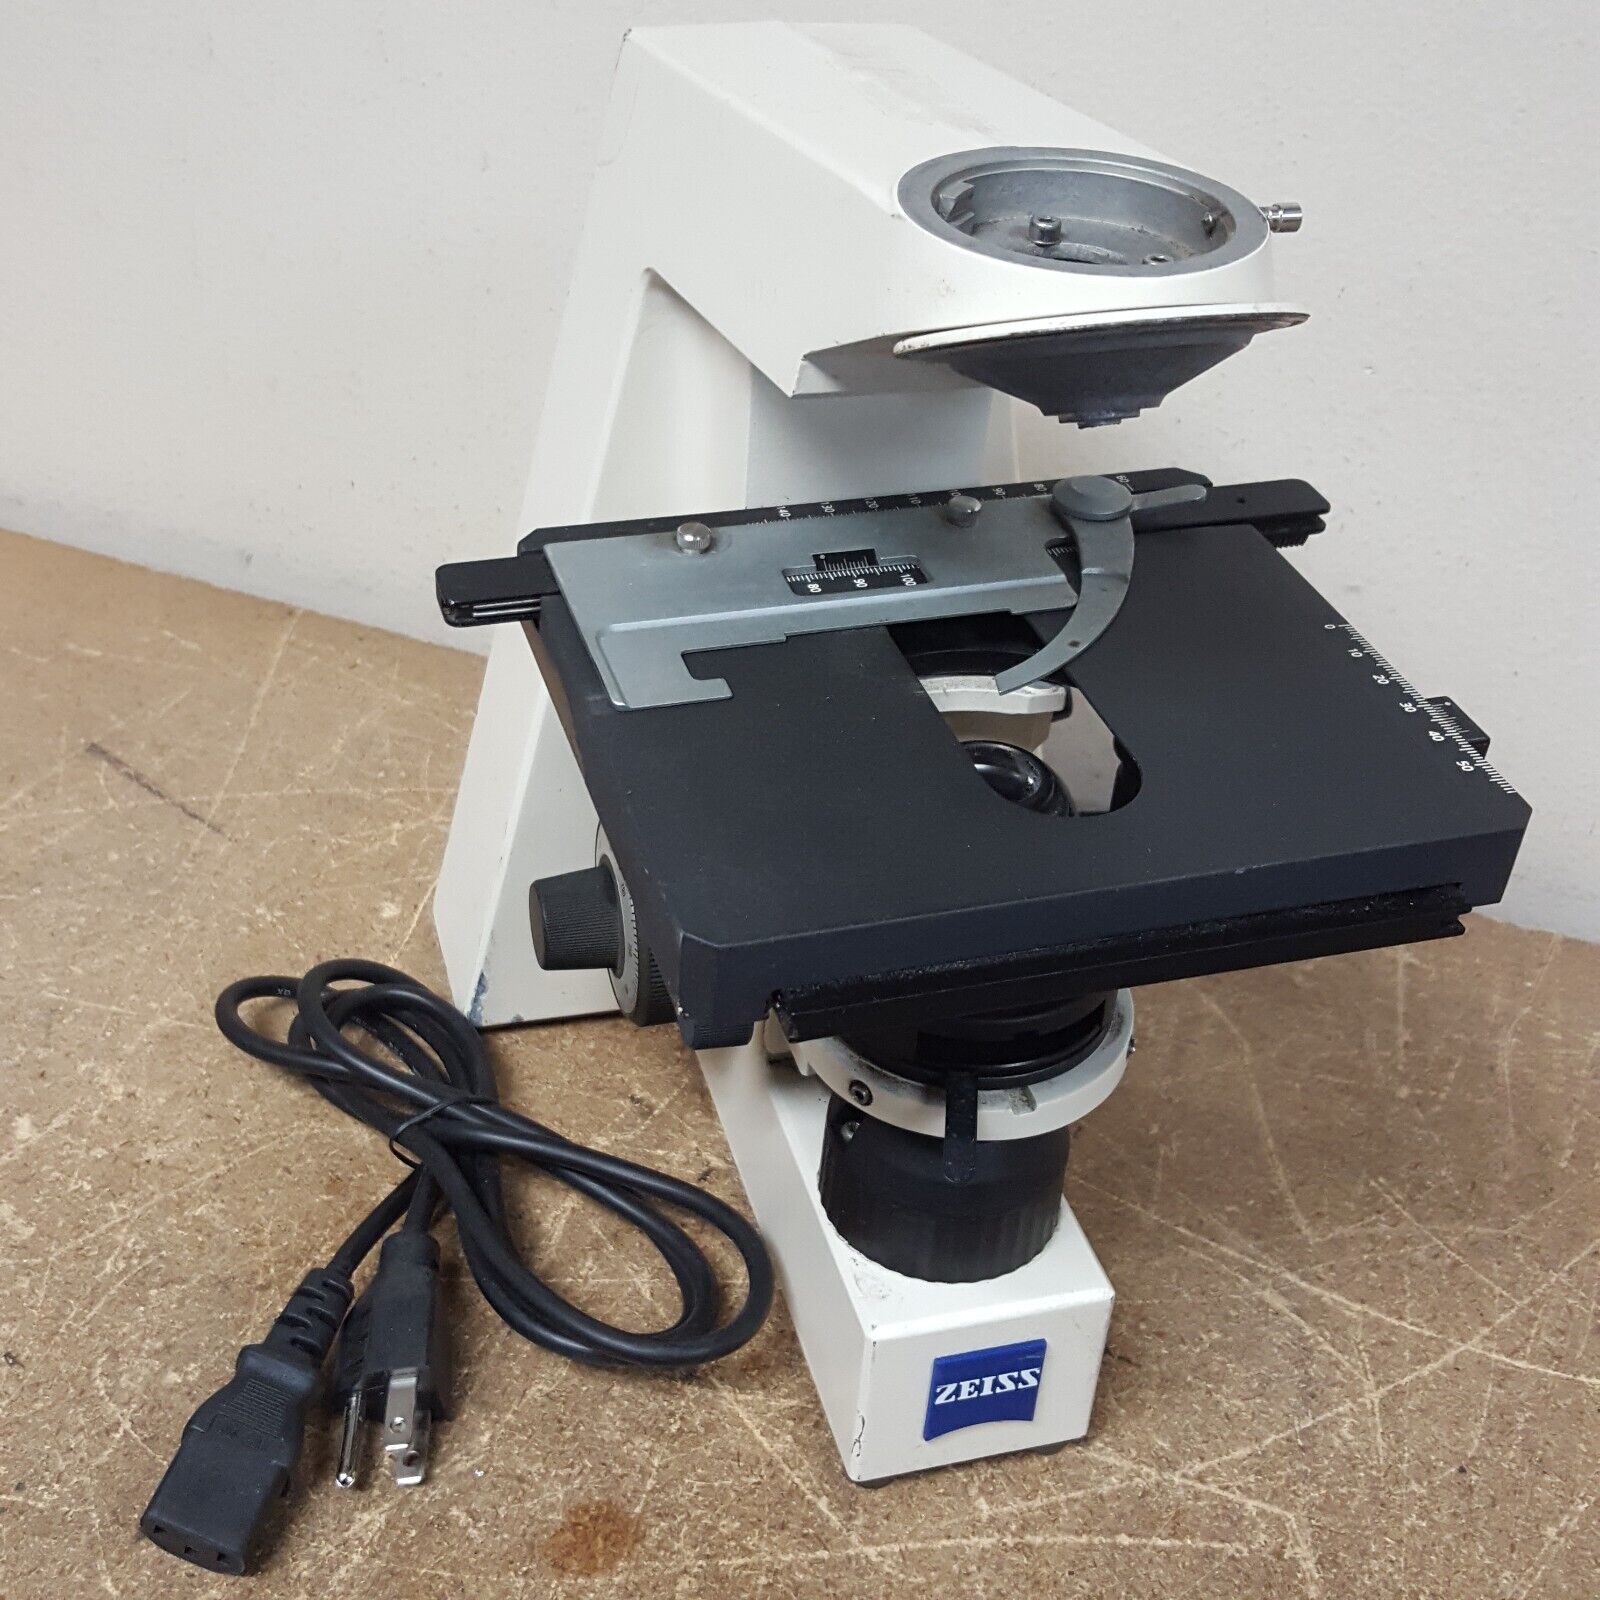 Zeiss Microscope Axiostar w/Power Cord (No Eyepiece) INCOMPLETE - Body Only